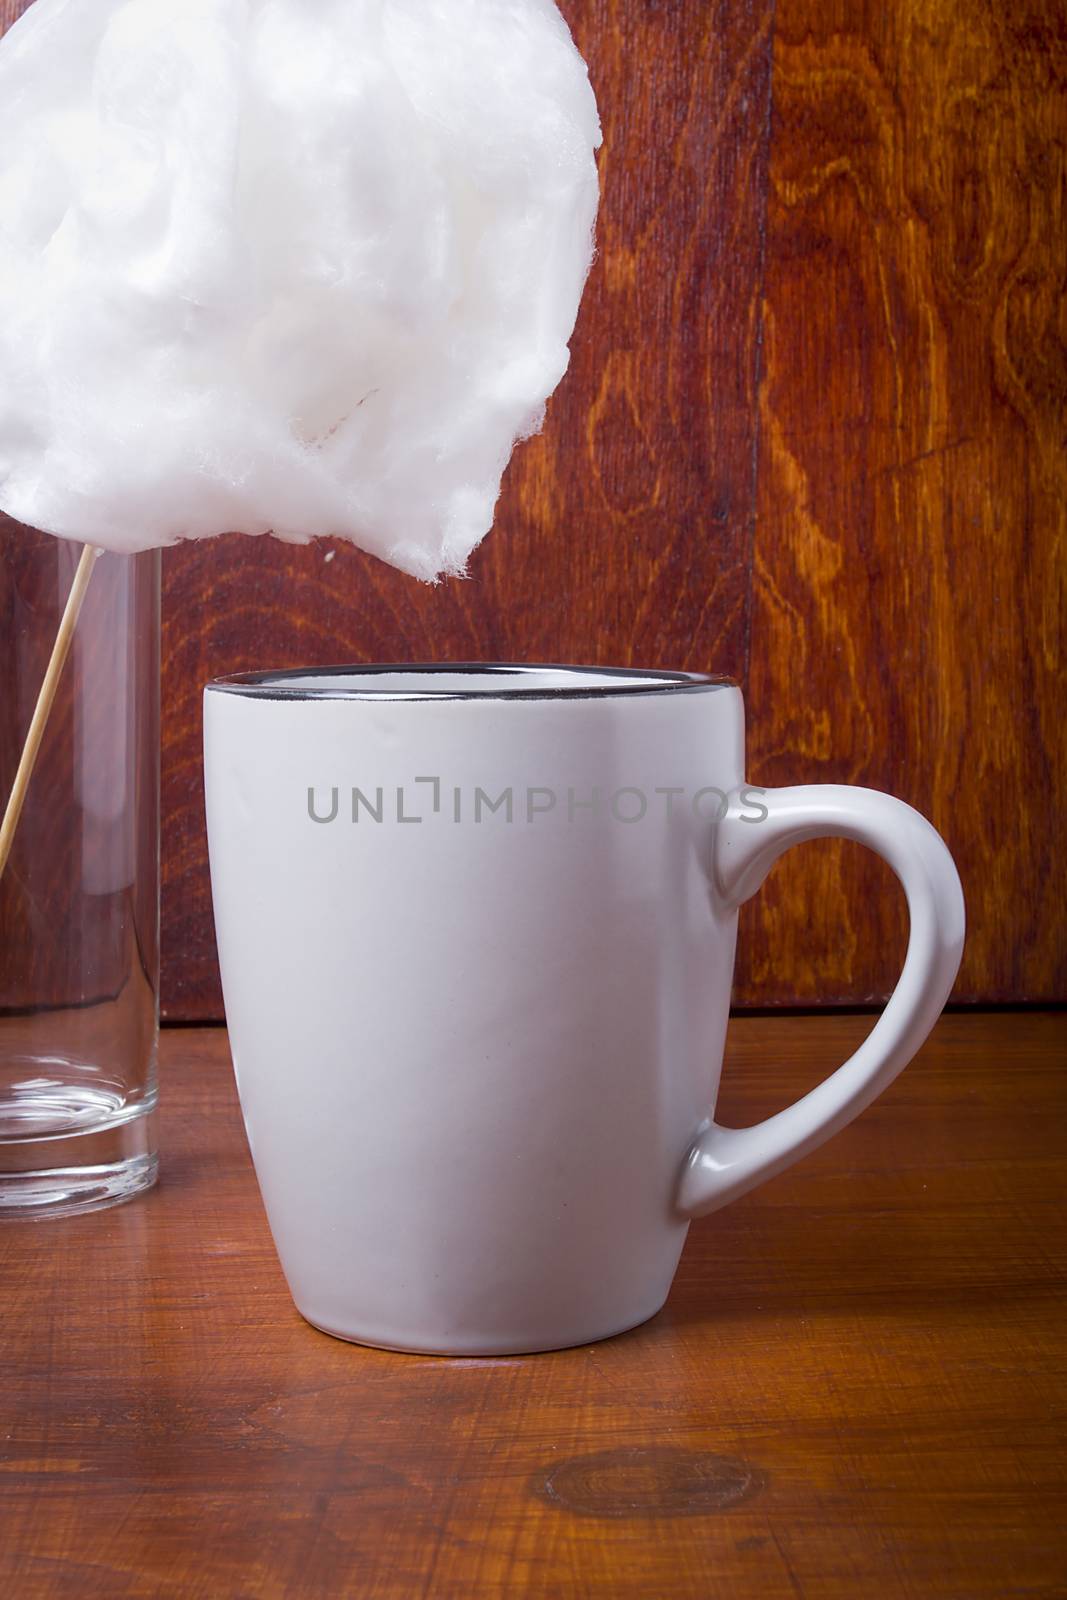 Cotton candy and cup with cocoa on a wooden table